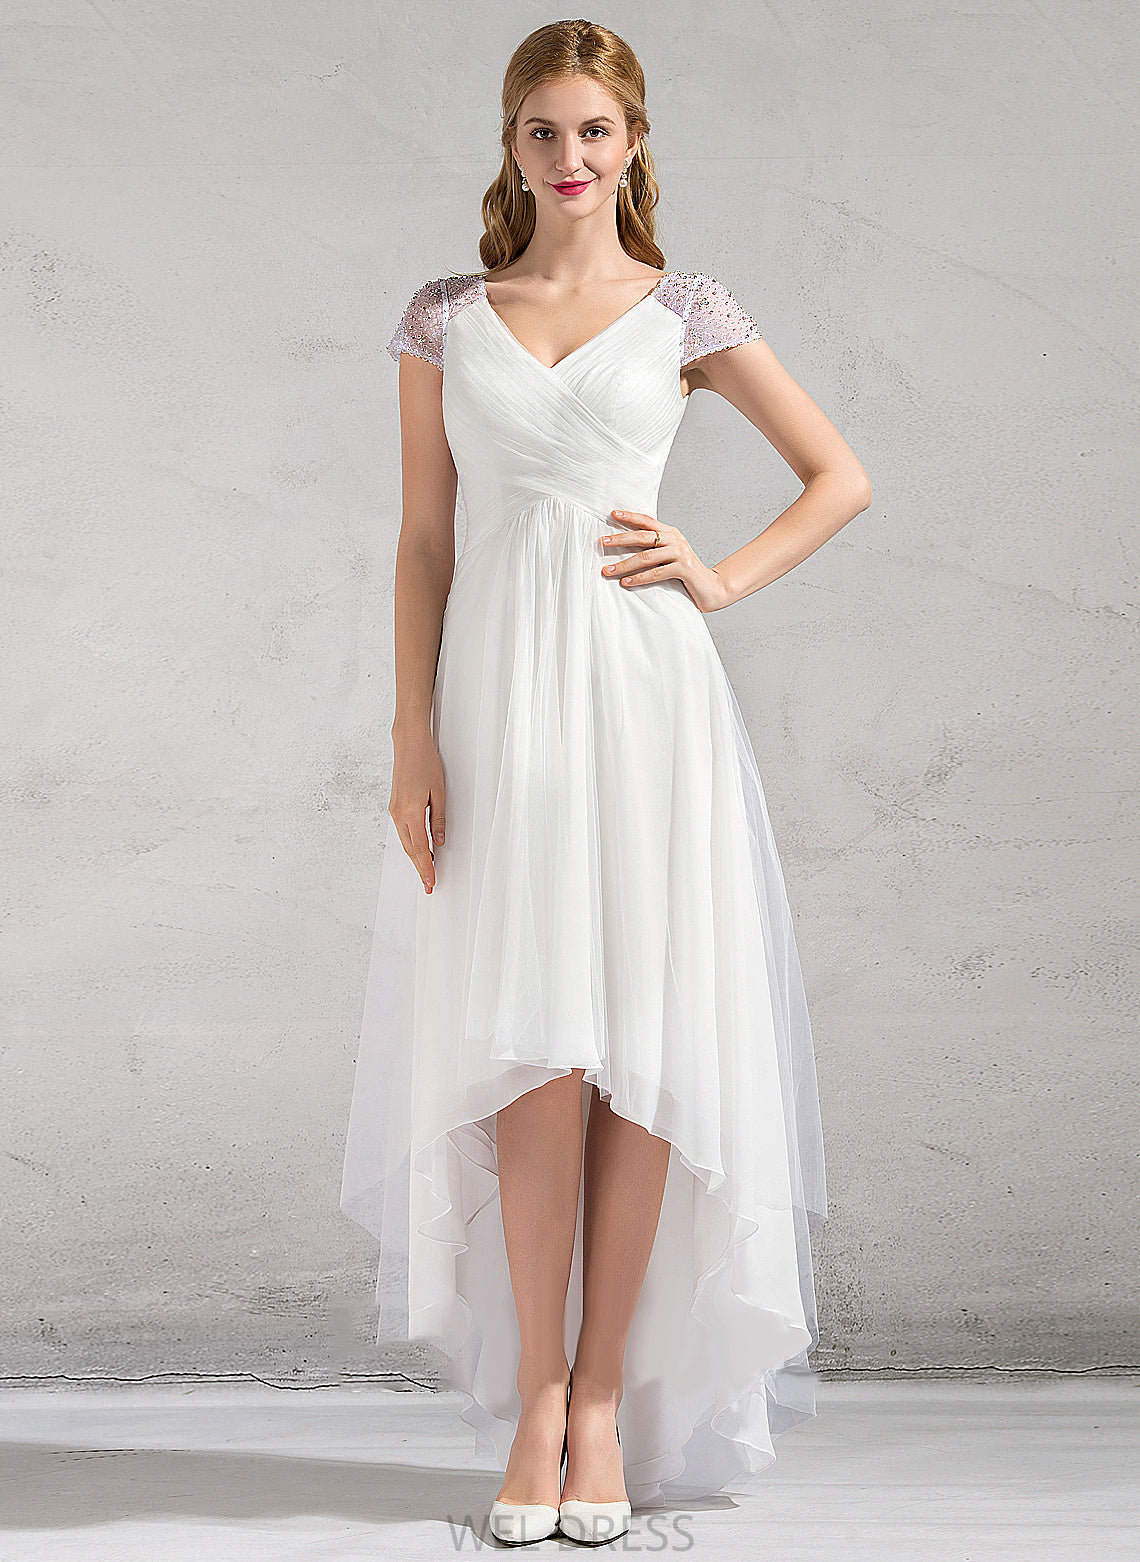 Wedding Dresses Sequins Asymmetrical Tulle Beading With Ruffle Wedding Dress V-neck A-Line Chelsea